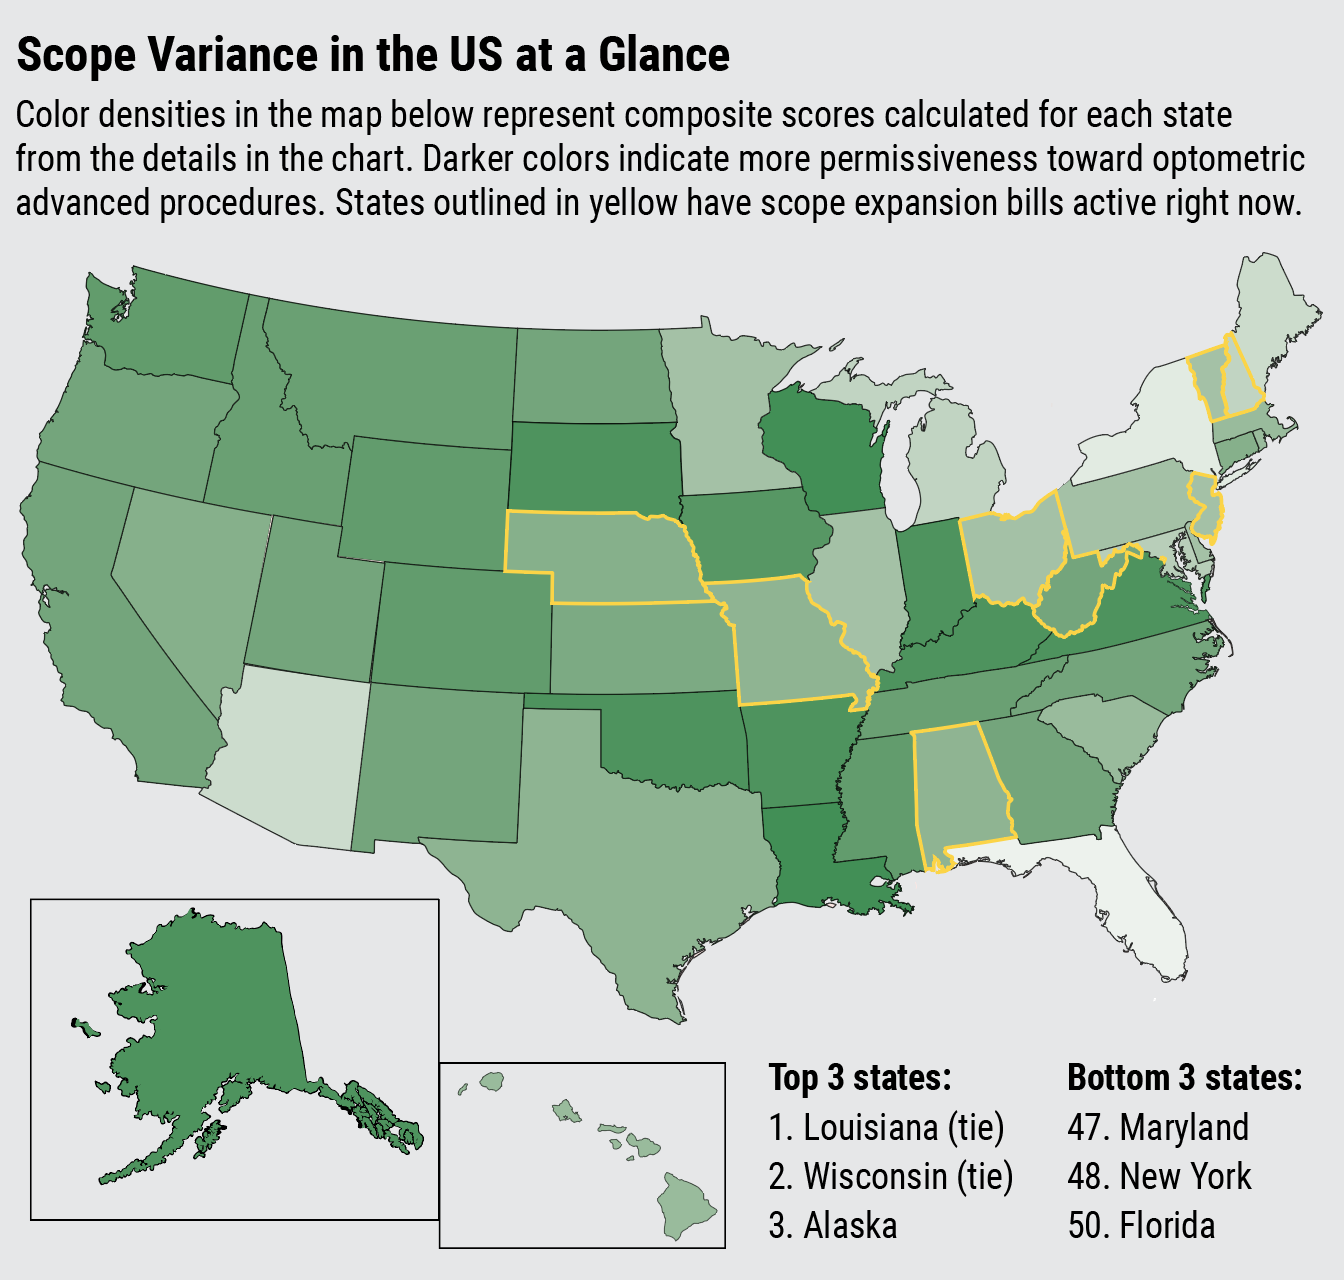 Scope Variance in the US at a Glance